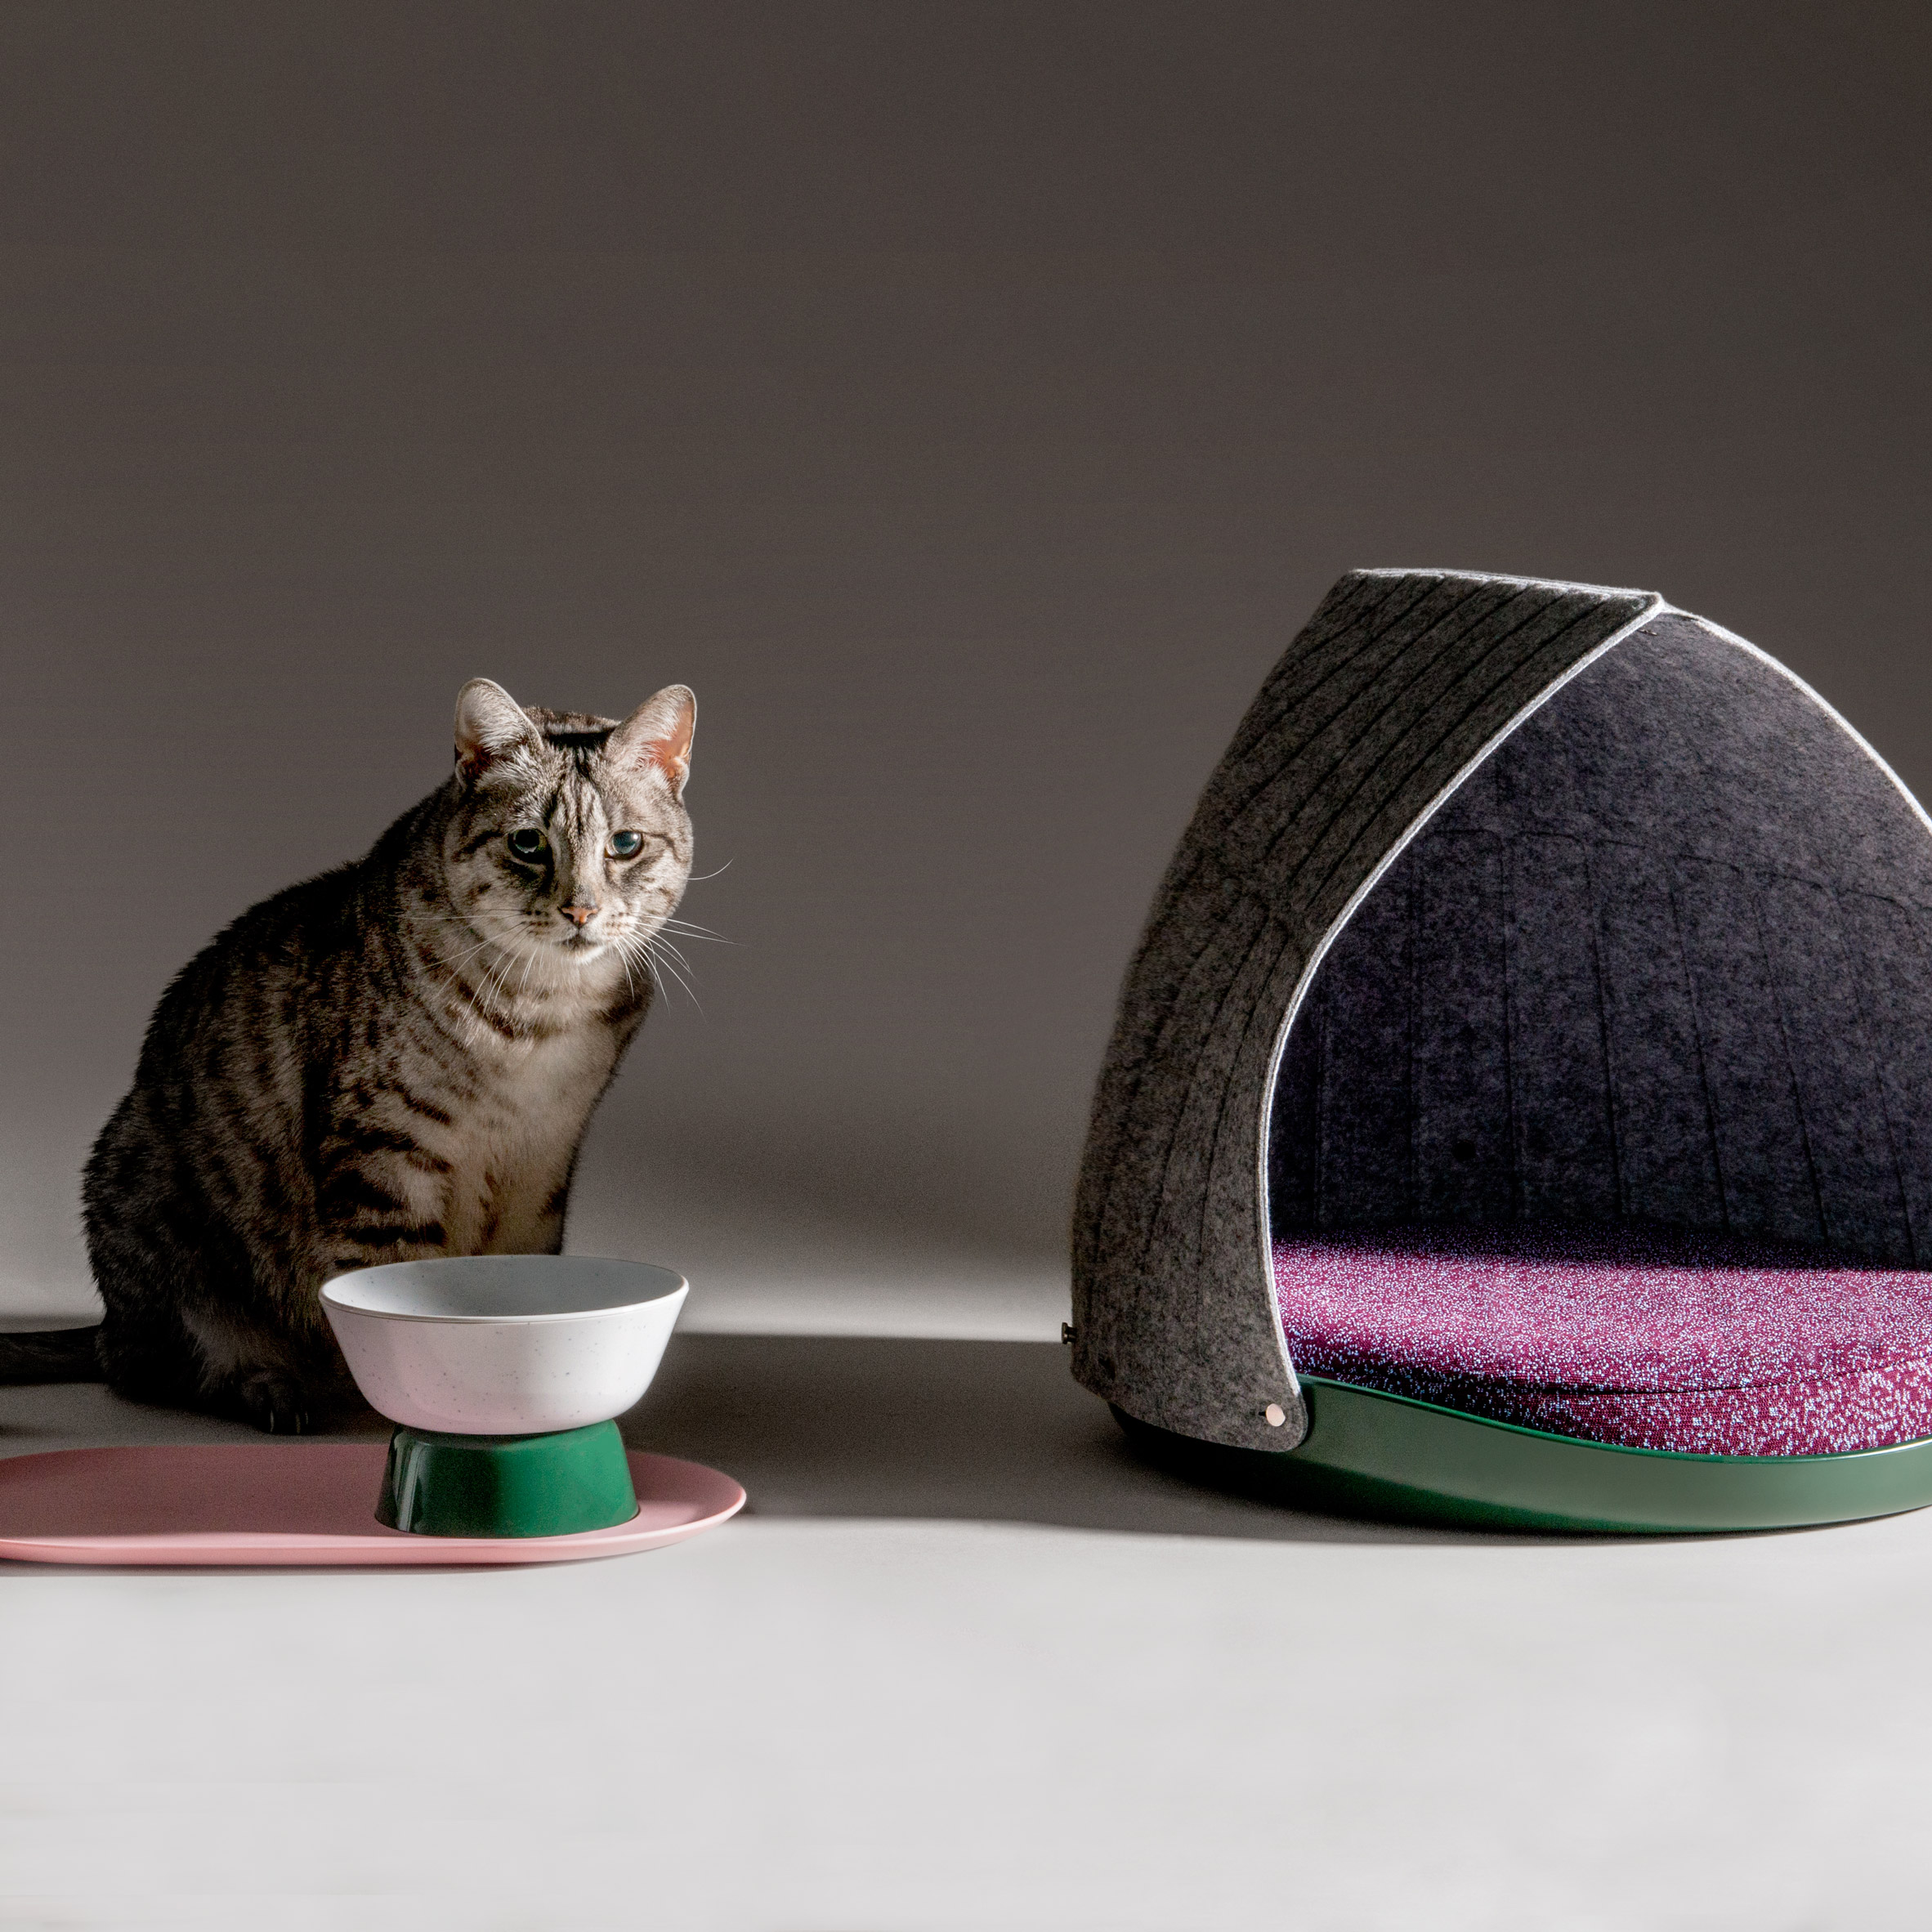 Cat Furniture By Layer And Cat Person Has Mix And Match Elements